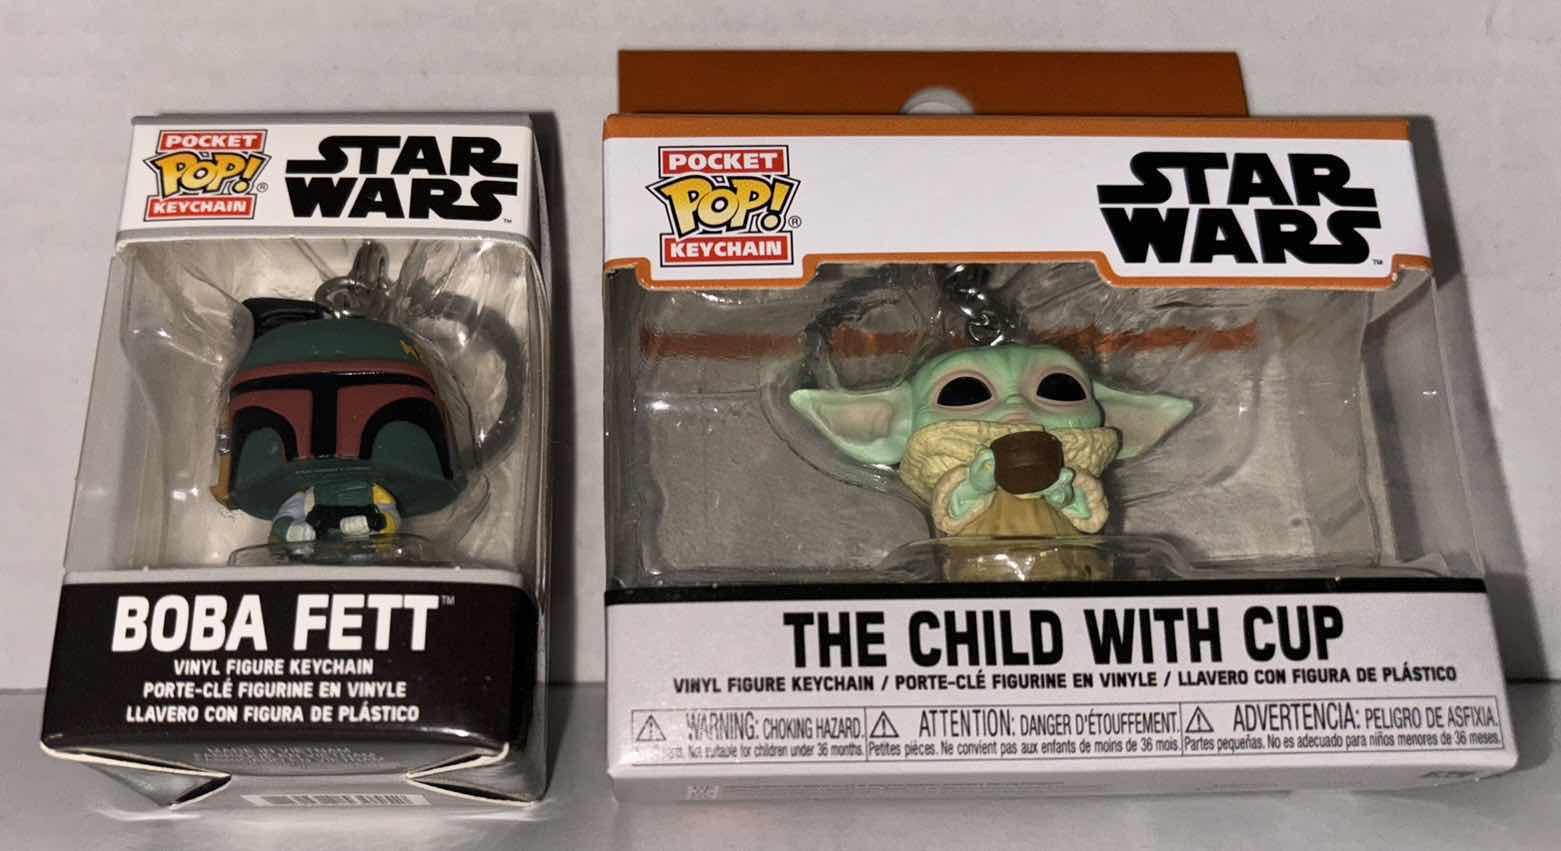 Photo 1 of NEW FUNKO POP! POCKET KEYCHAIN 2-PACK, STAR WARS “BOBA FETT” & “ THE CHILD WITH CUP”